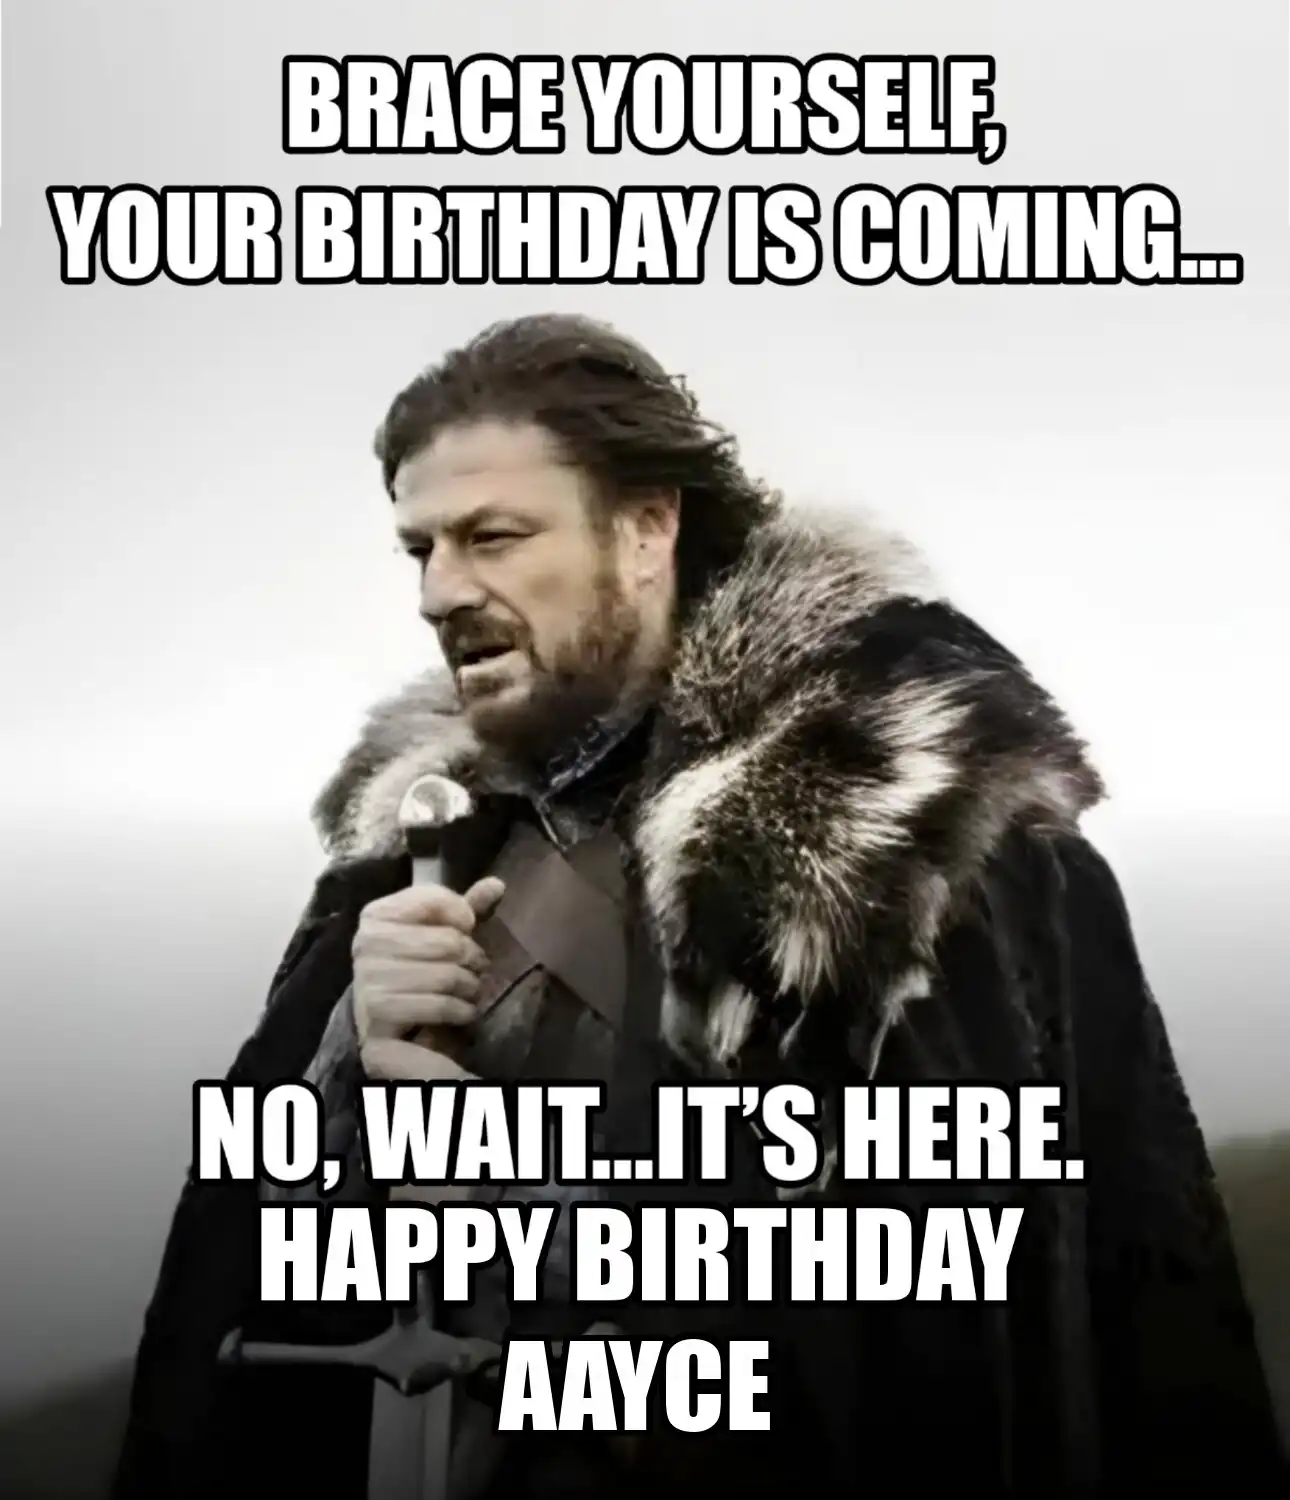 Happy Birthday Aayce Brace Yourself Your Birthday Is Coming Meme